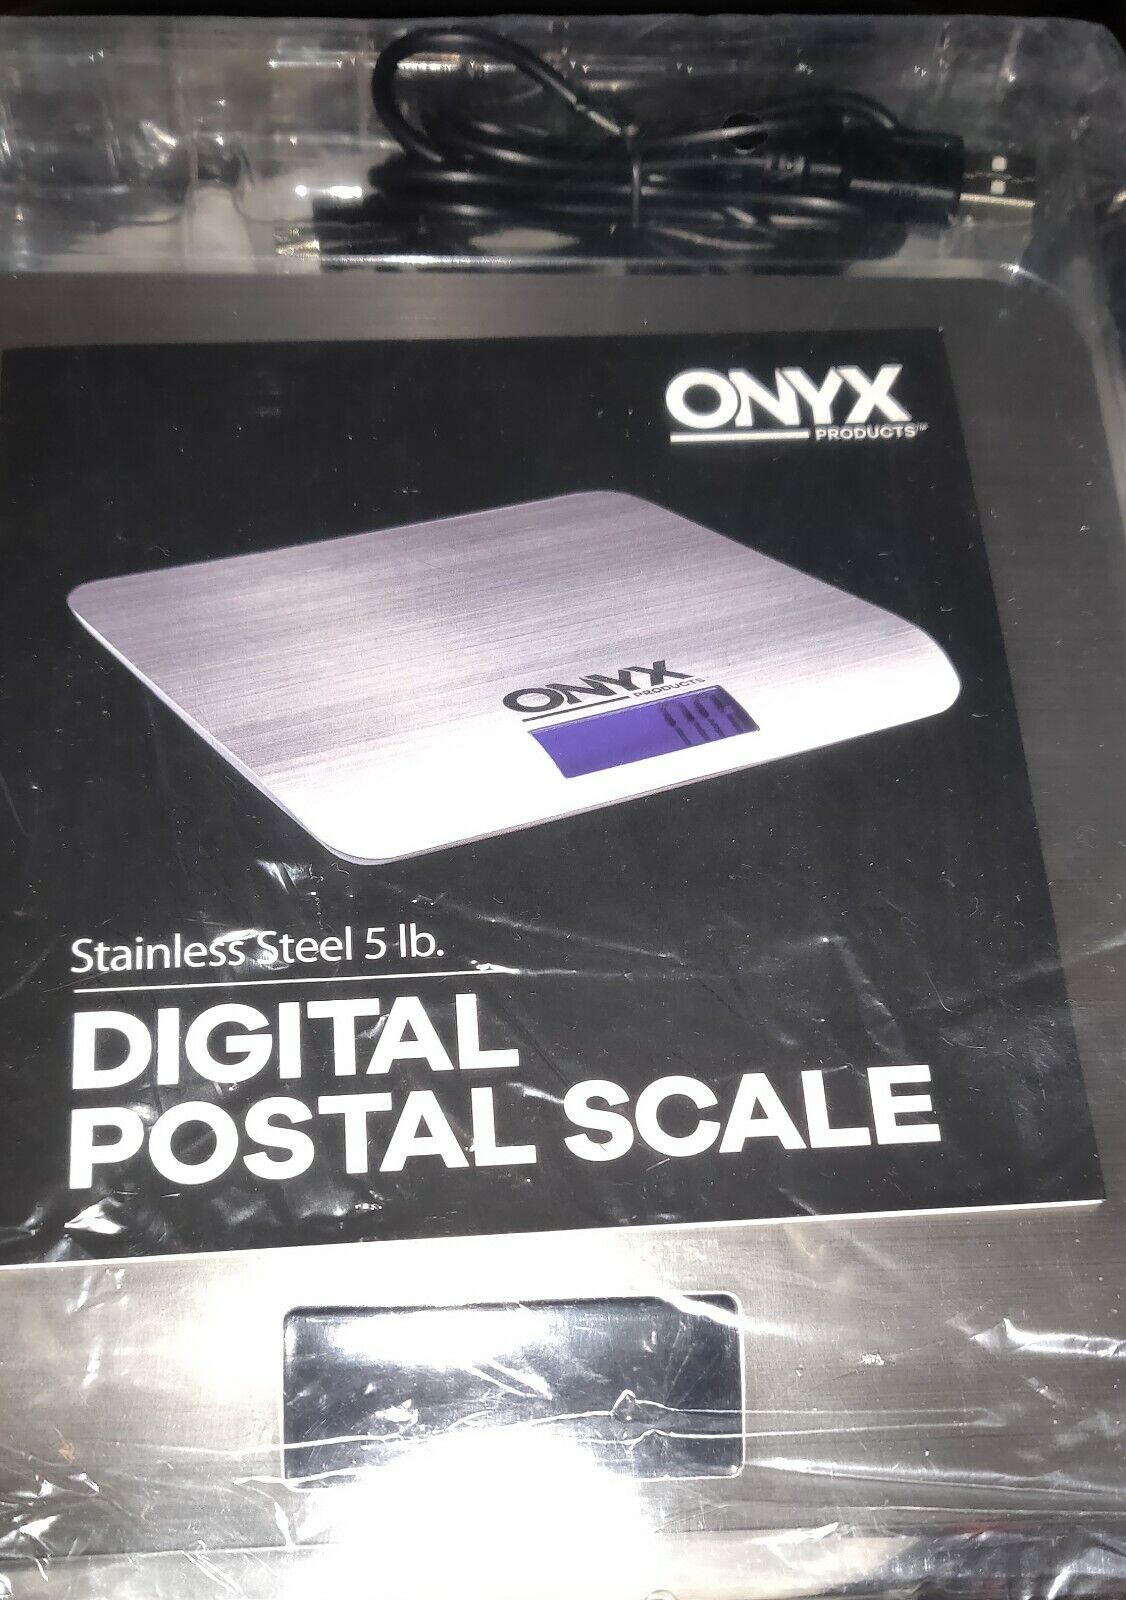 Digital Postal Scale A3880v for sale online Onyx Stainless Steel 5 Lb